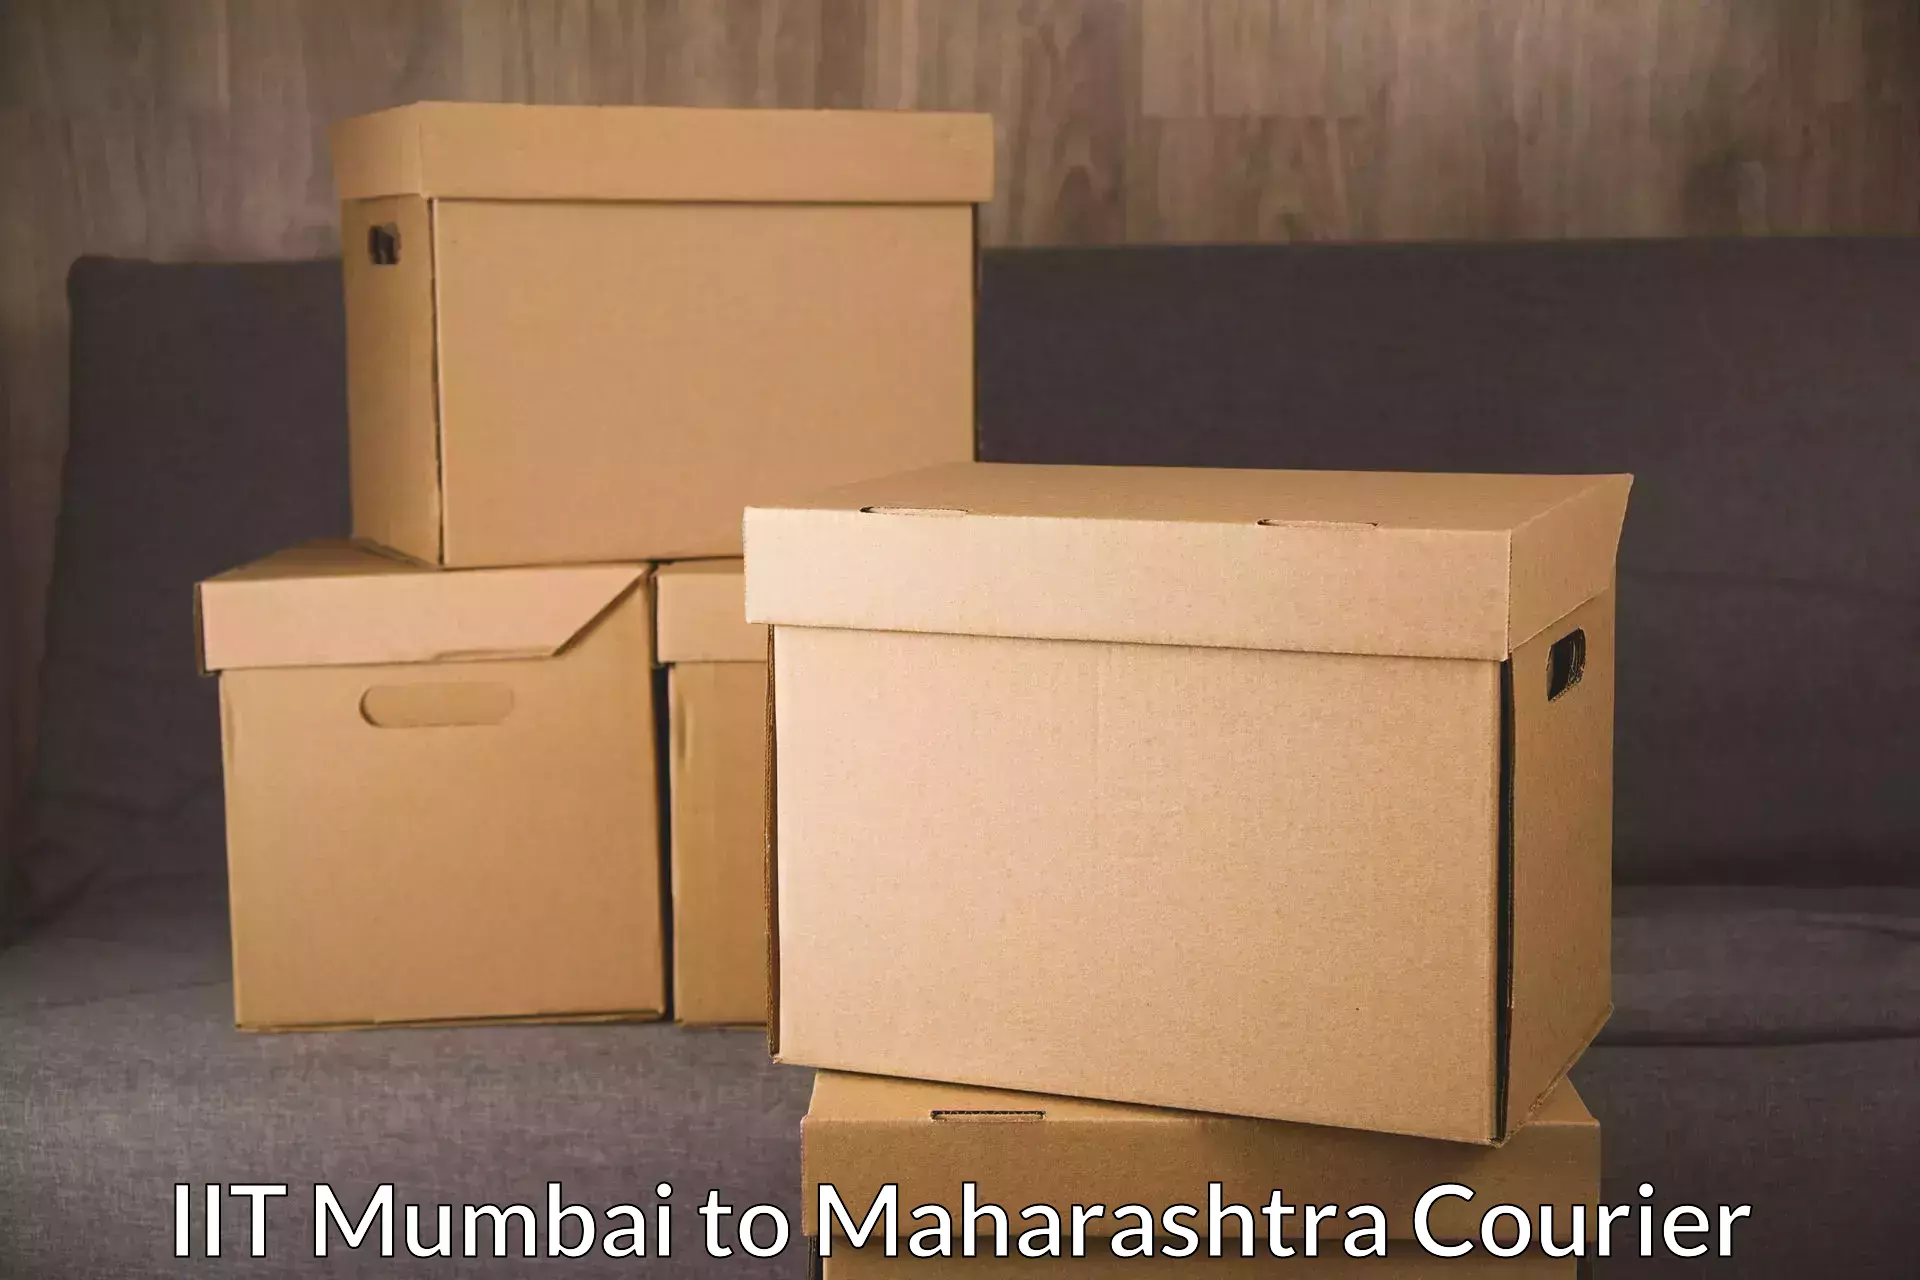 Package delivery network IIT Mumbai to Palghar